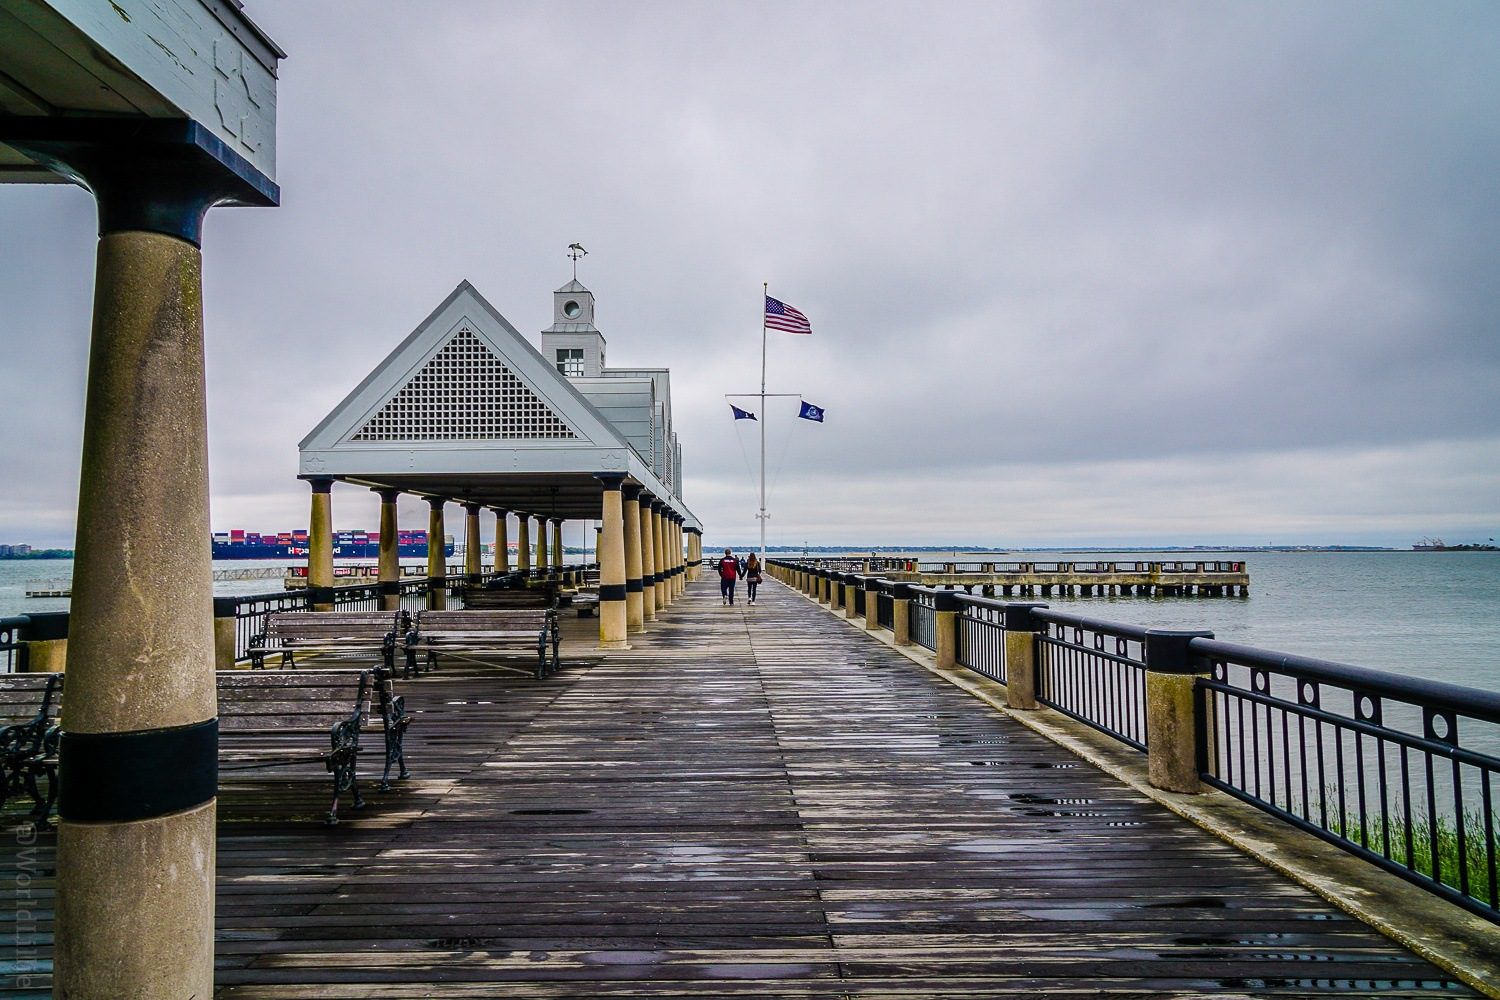 A stormy pier at Waterfront Park.